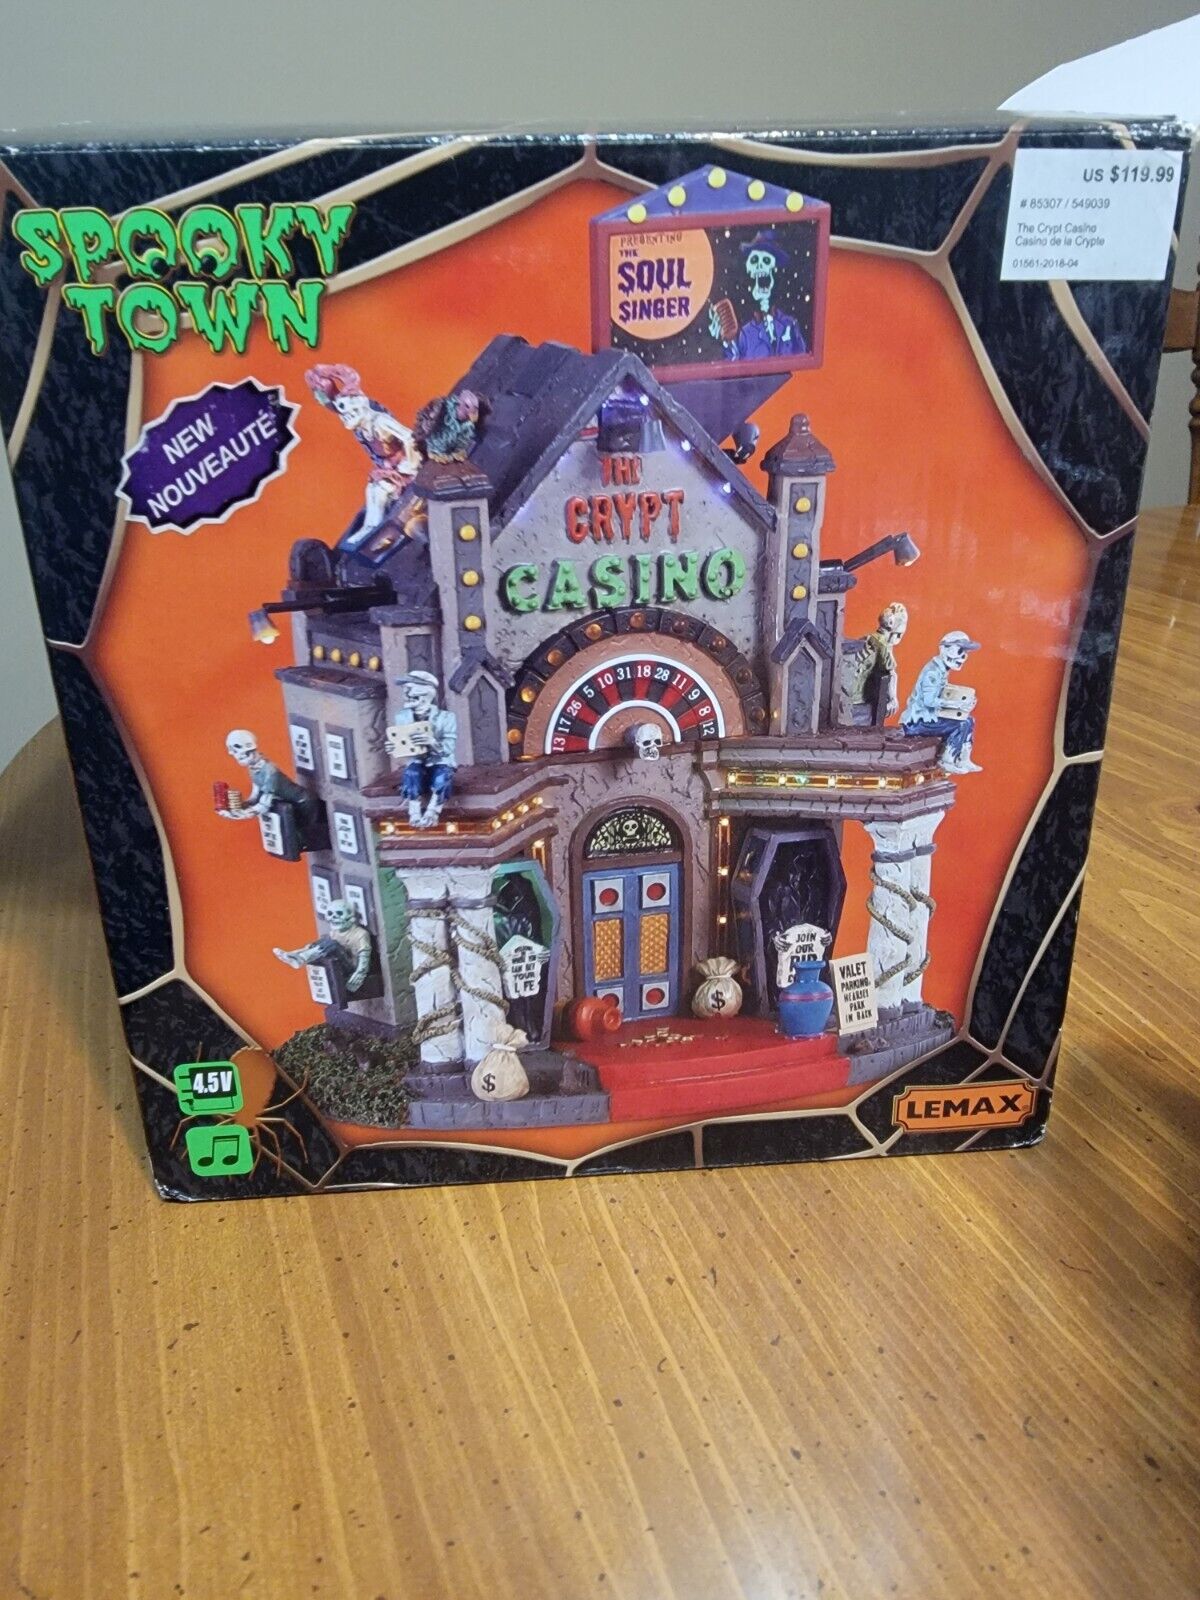 Lemax Spooky Town Crypt Casino